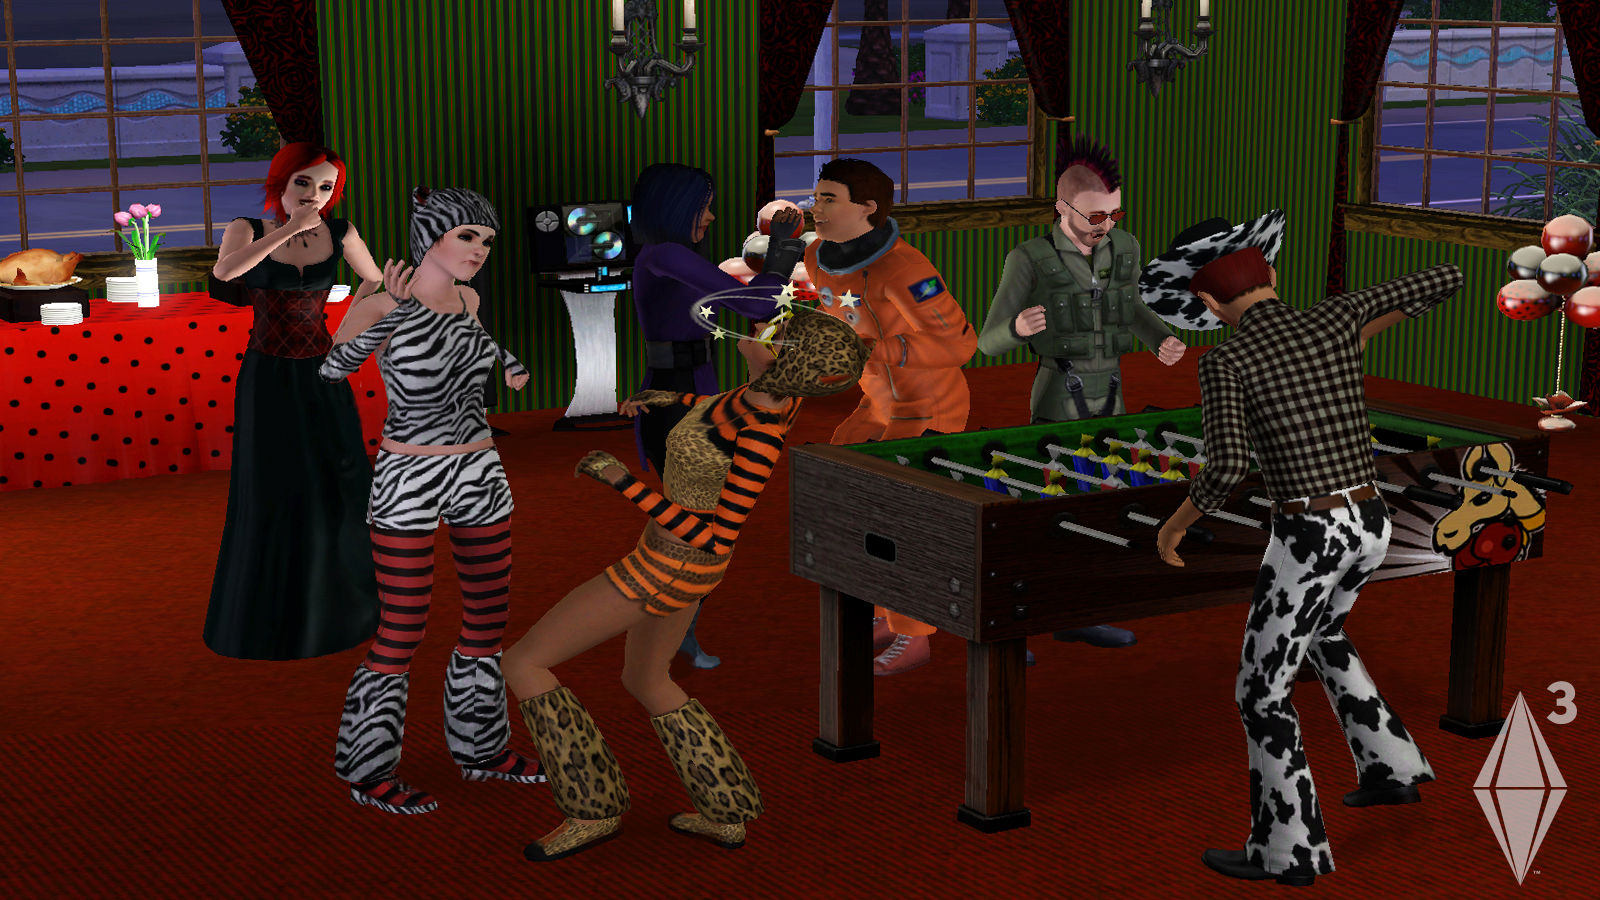 the sims 3 complete collection torrent